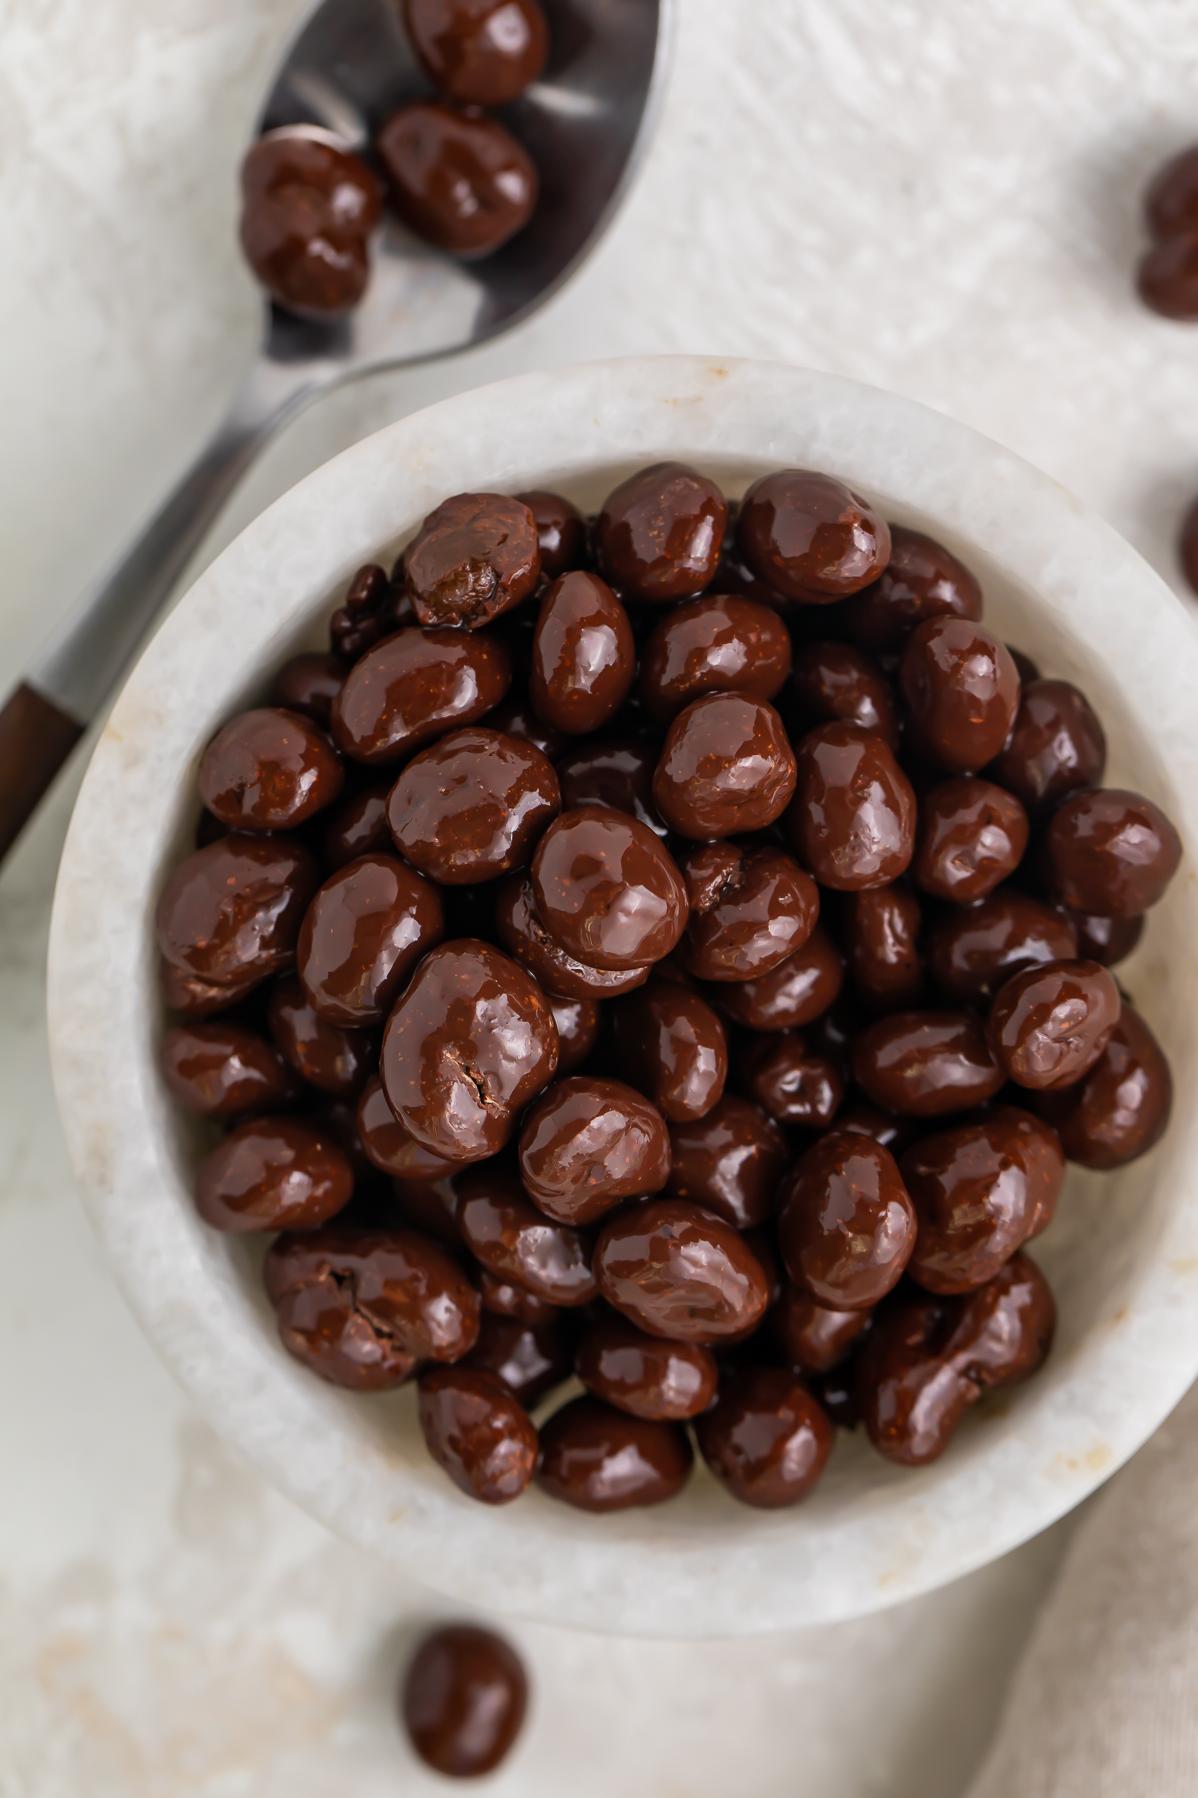 Indulge in Rich Chocolate Covered Espresso Beans Today